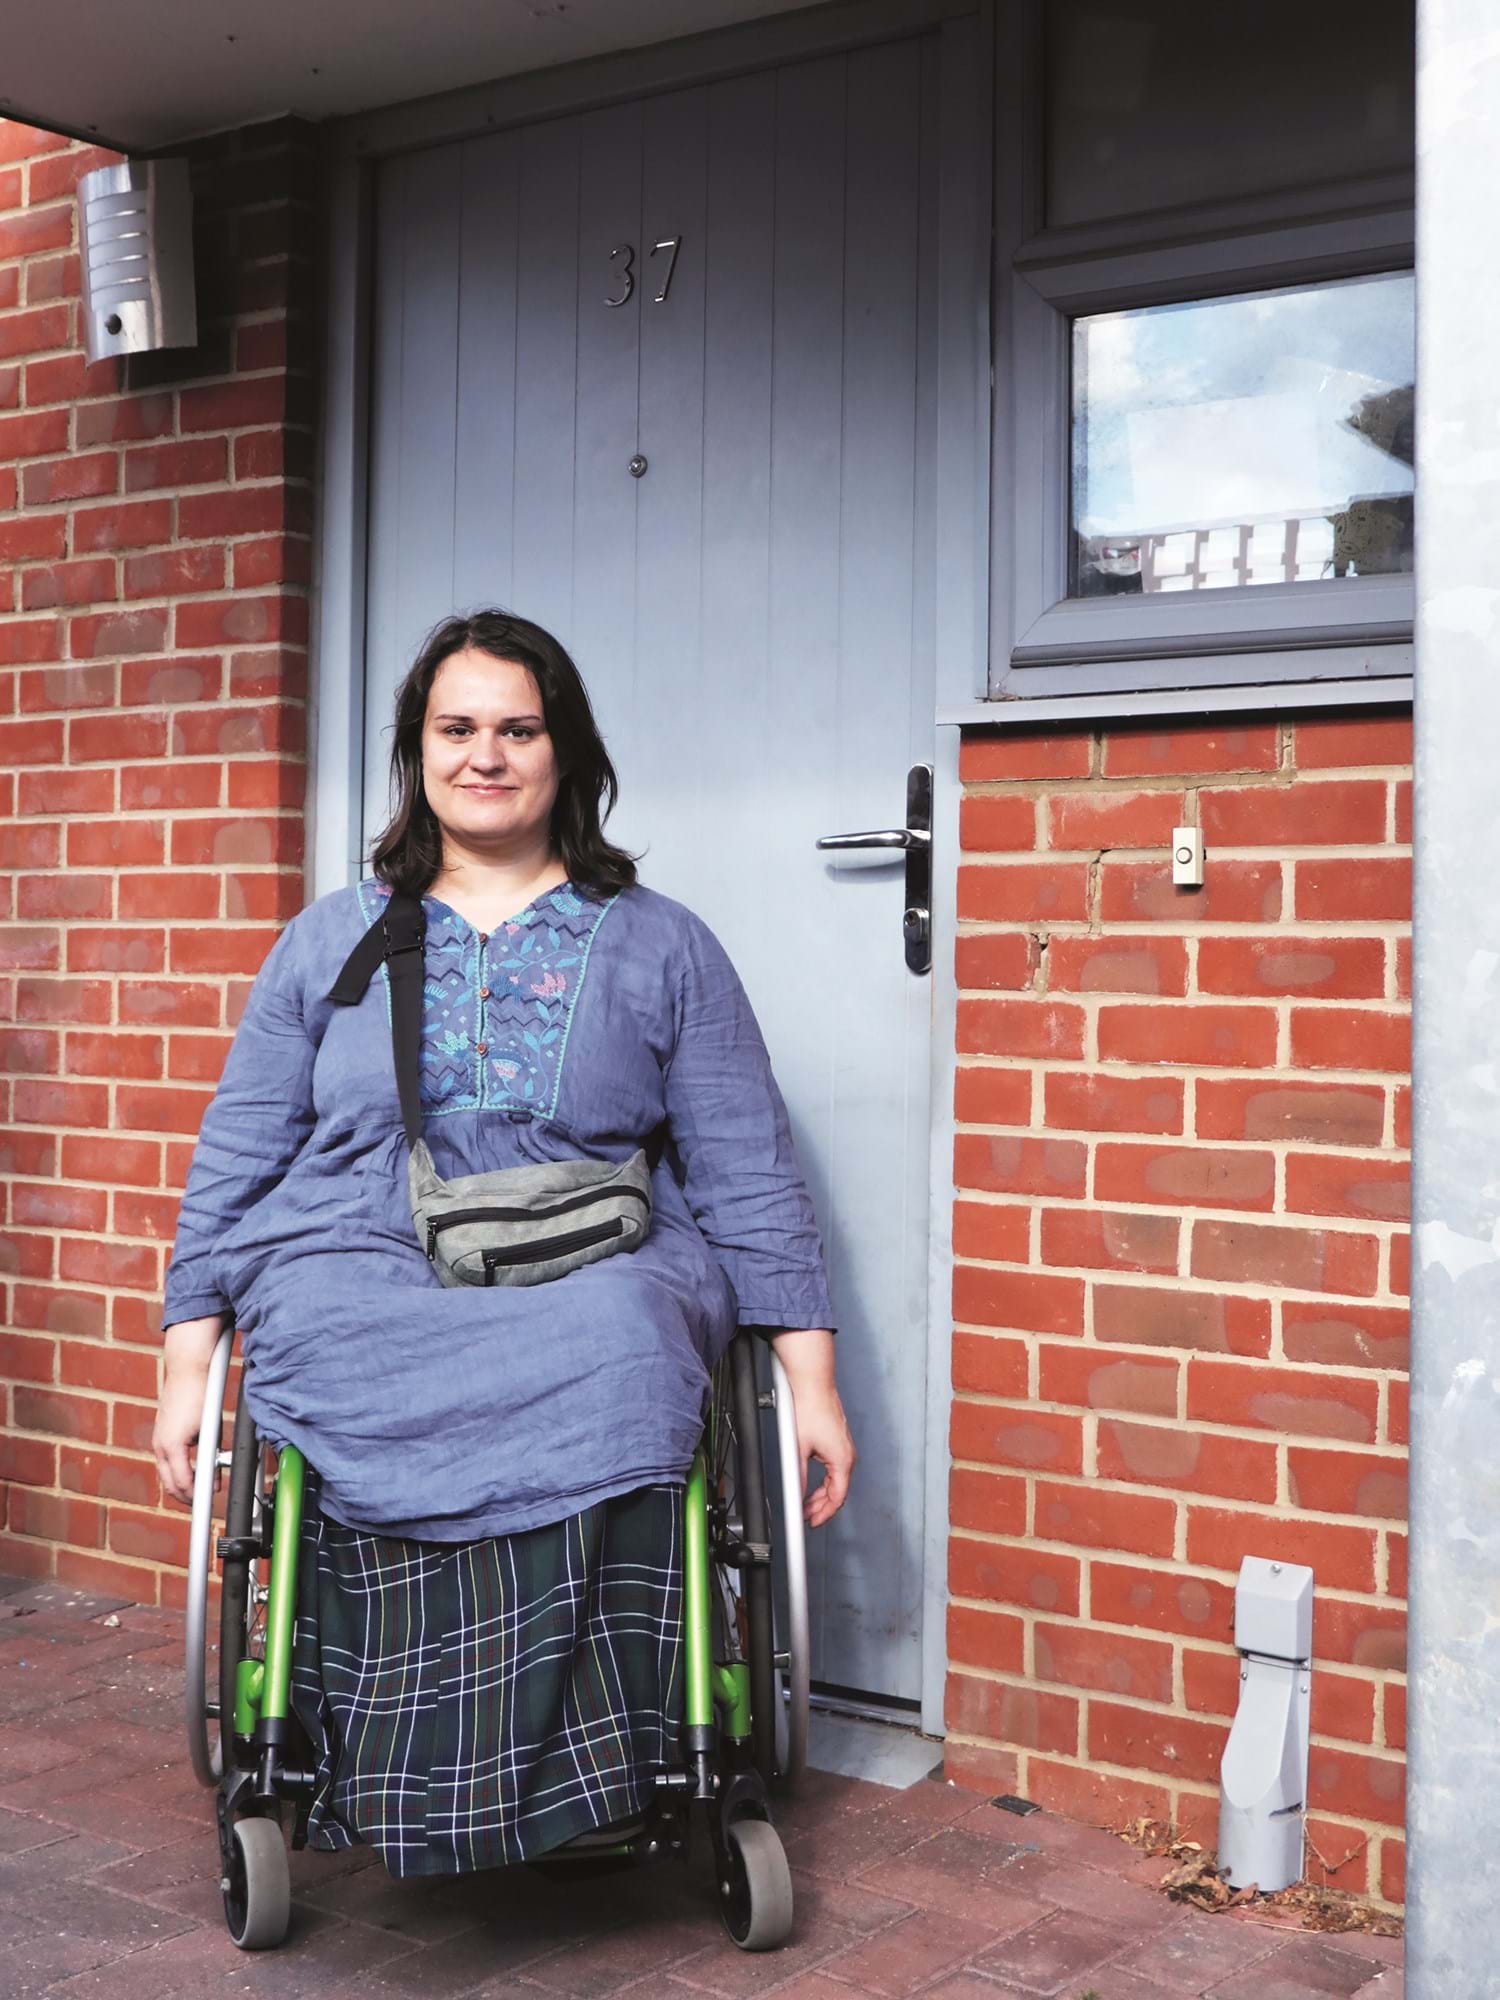 Person in a wheelchair smiling in front of a red brick wall and blue door 